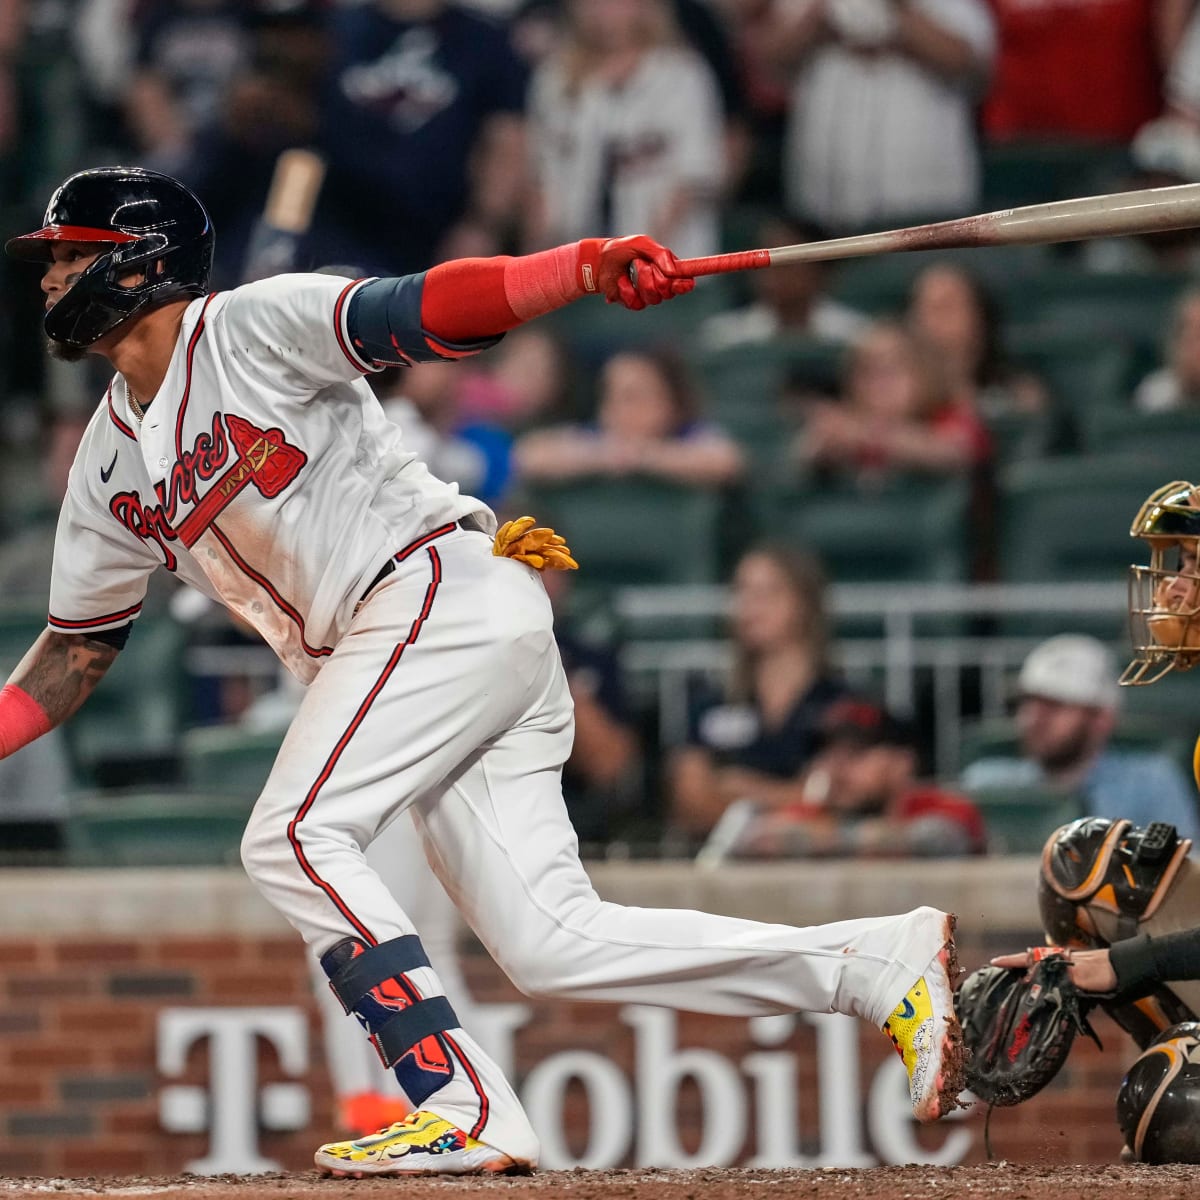 Takeaways: The Braves walk it off over the Padres to open the